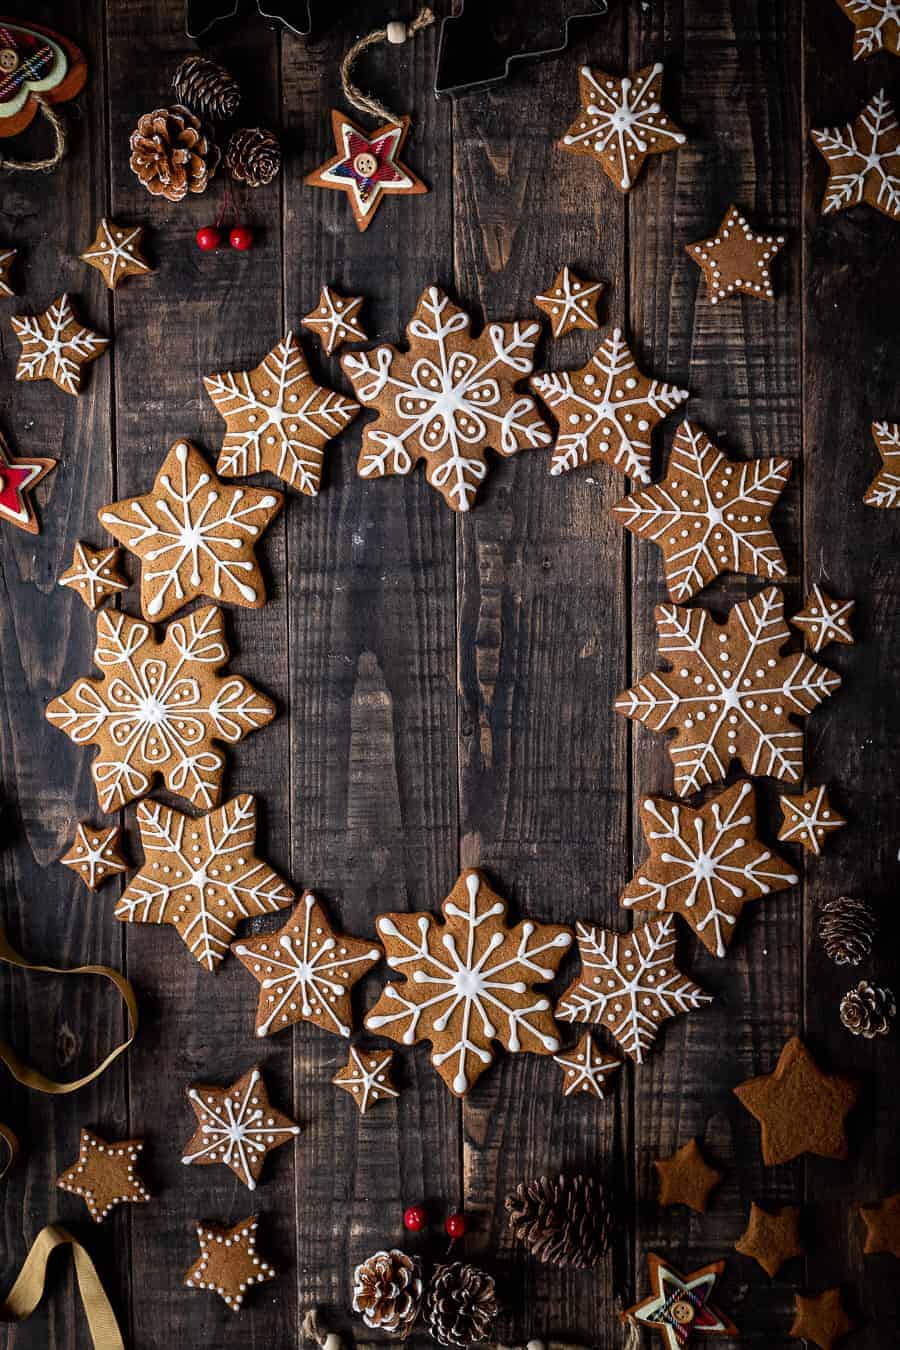 Vegan gingerbread snowflake cookies arranged in a wreath shape on a dark wood background with pine cones and Christmas decorations.